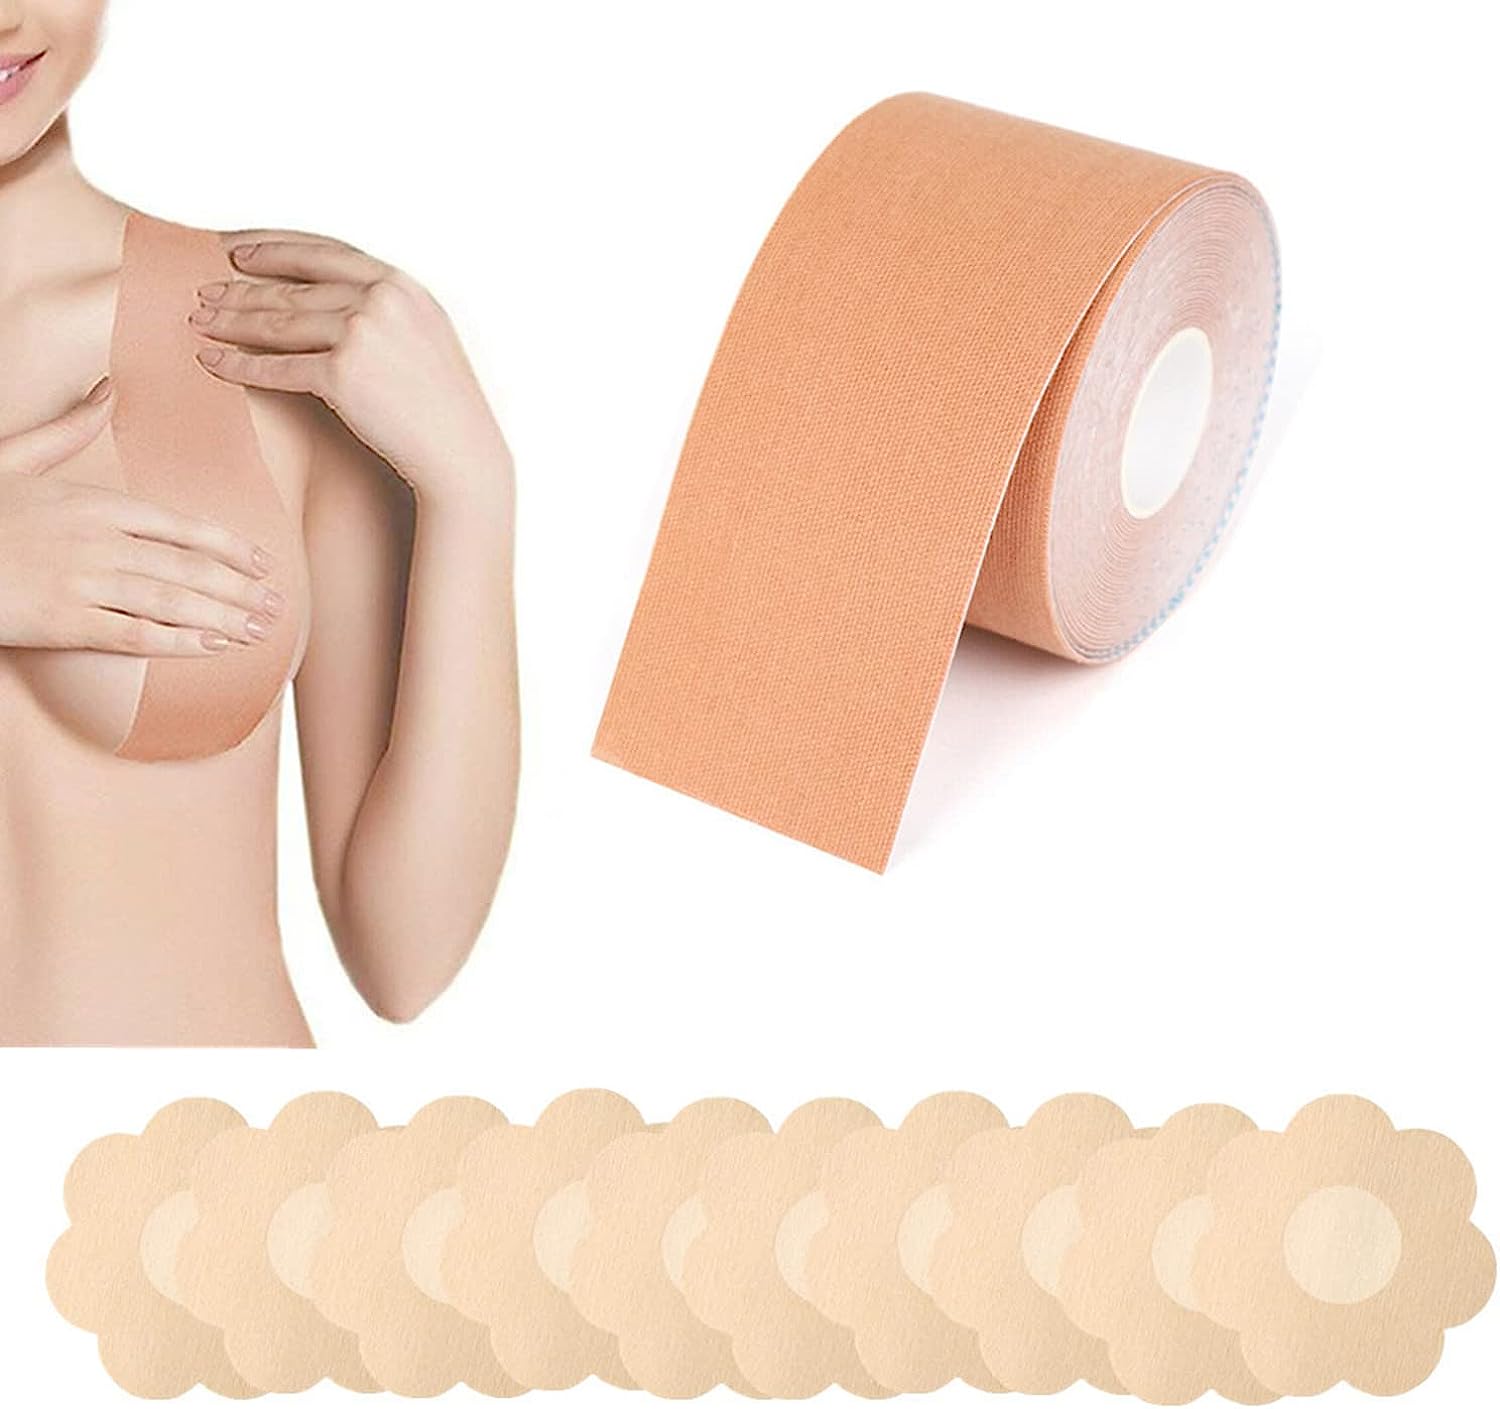 Boob Tape and 10pcs Backless Nipple Cover Set, [...]